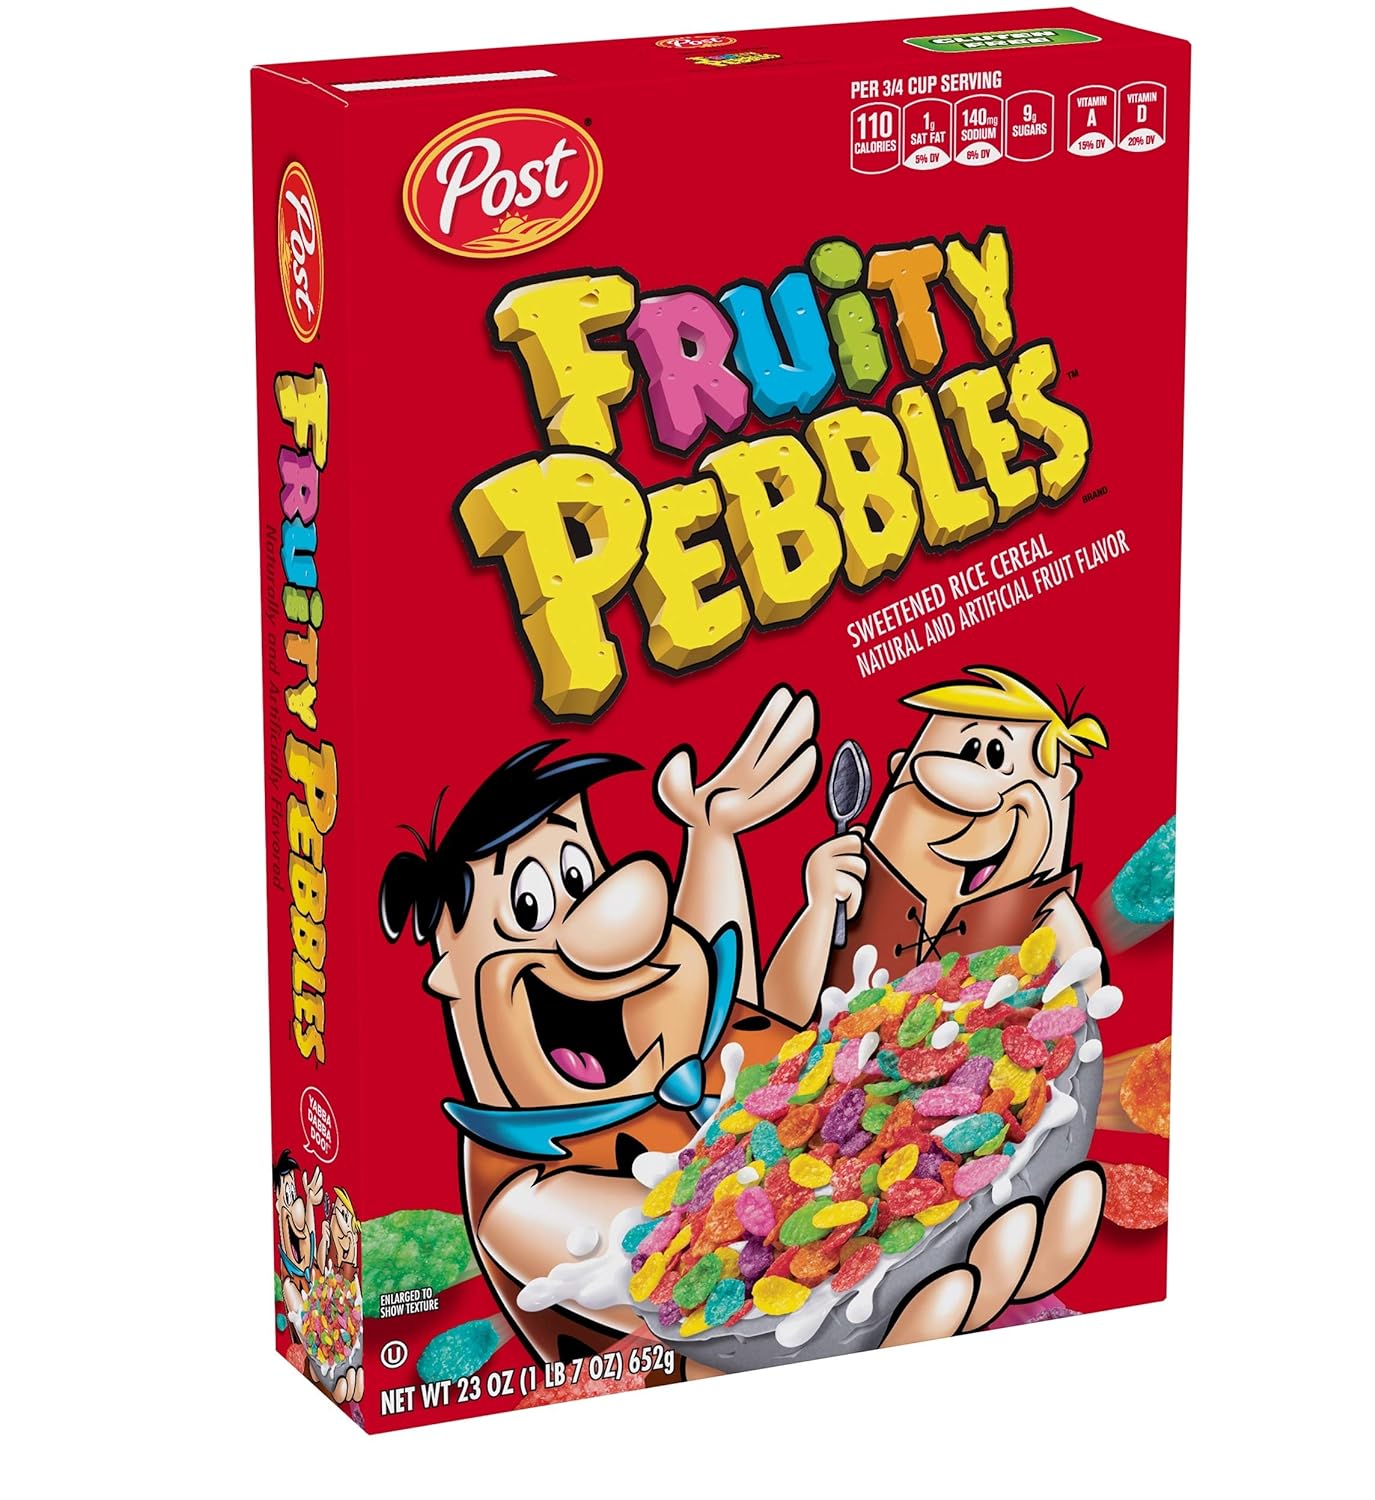 Post Fruity Pebbles Gluten Free Cereal, 23 Ounce (Pack of 12)